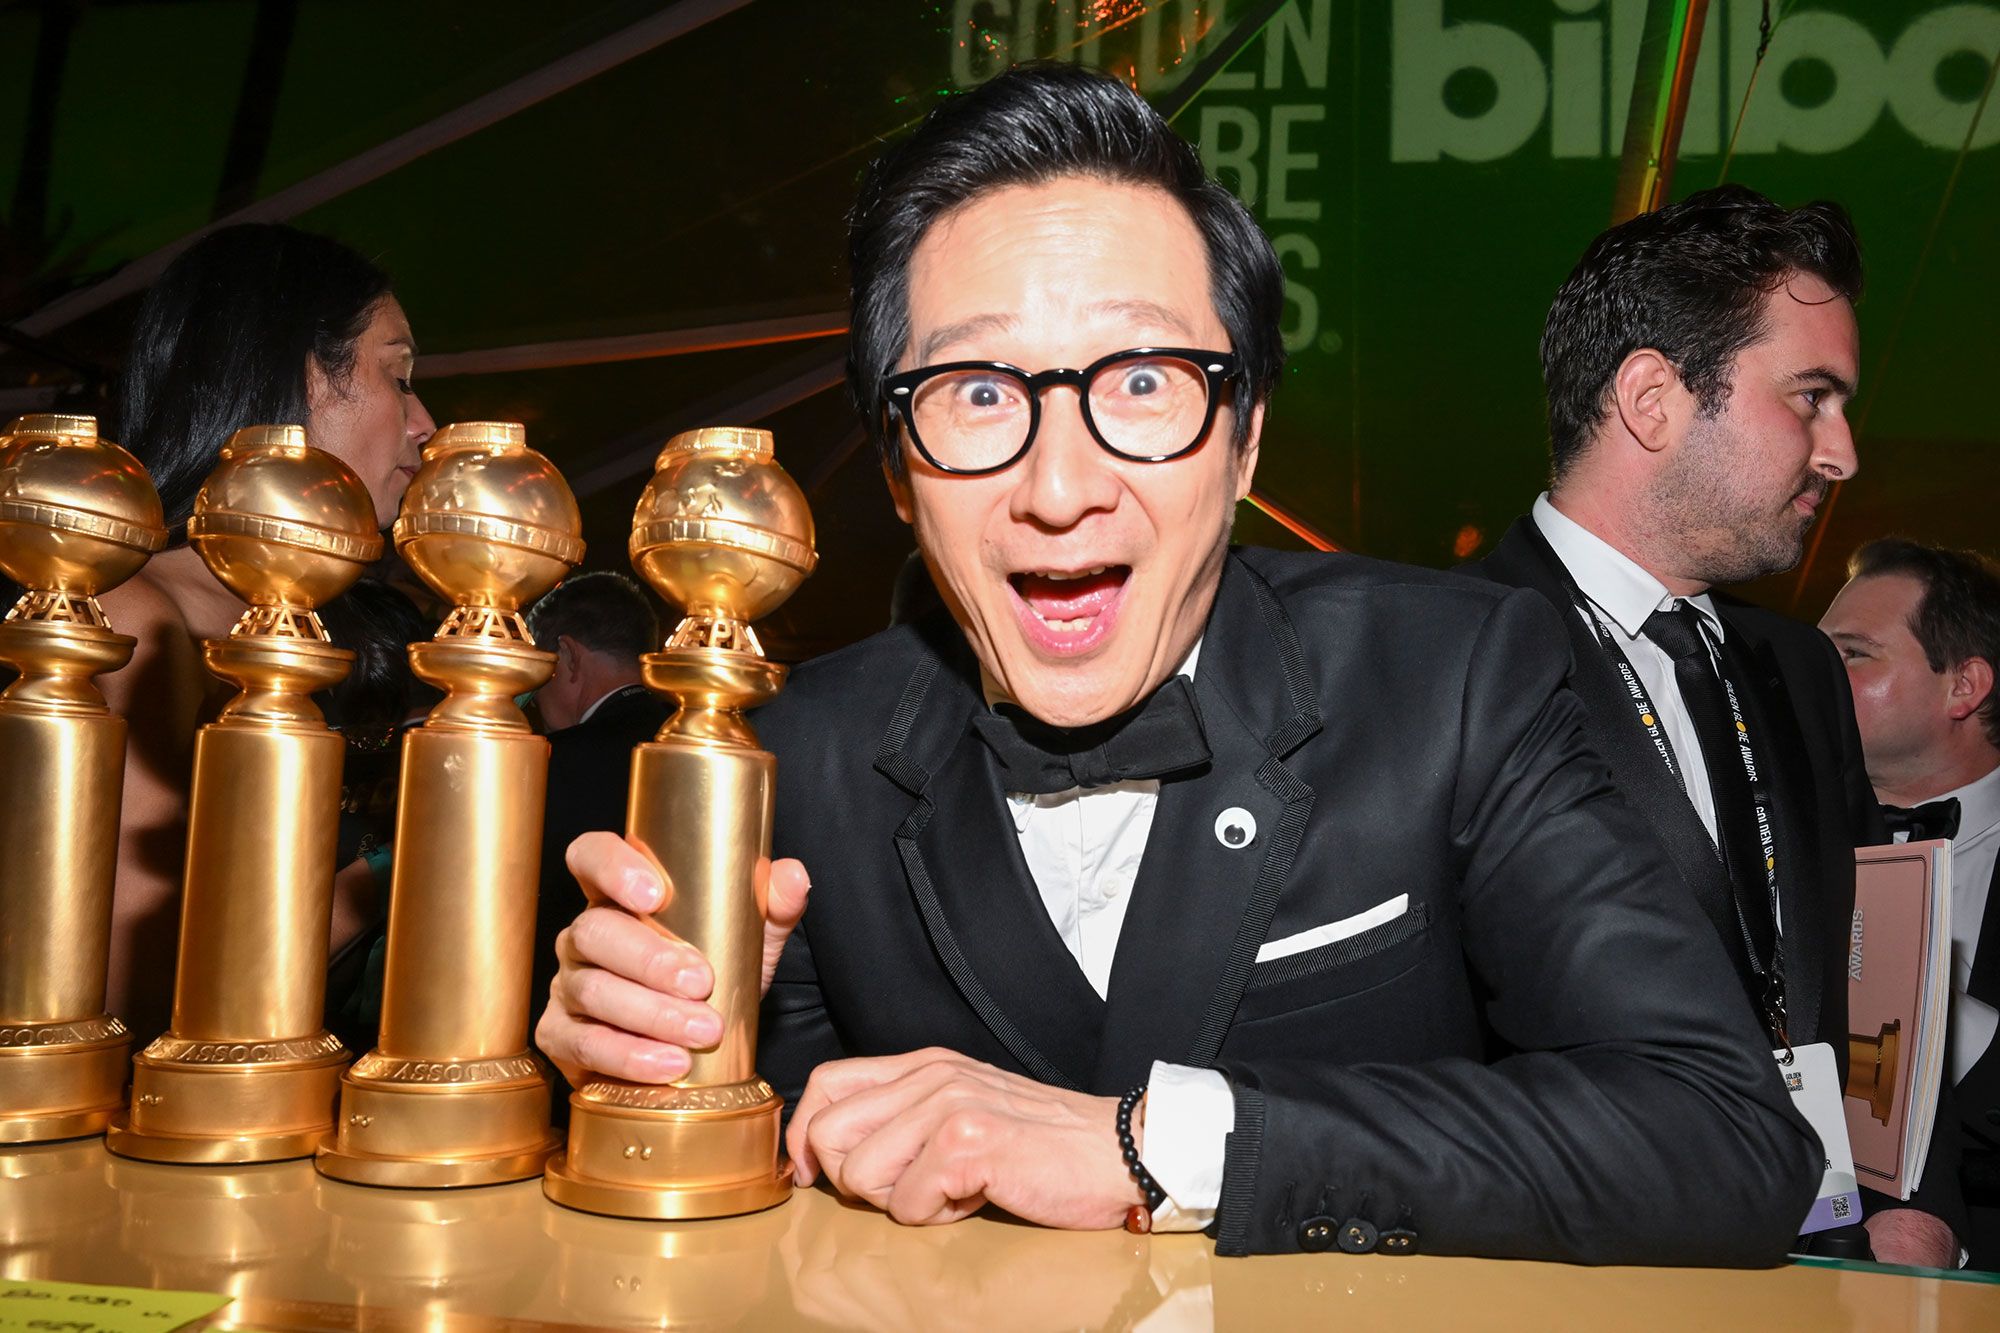 Actor Ke Huy Quan, wearing a black and white tuxedo with black rimmed glasses, smiles while gripping a Golden Globe award.